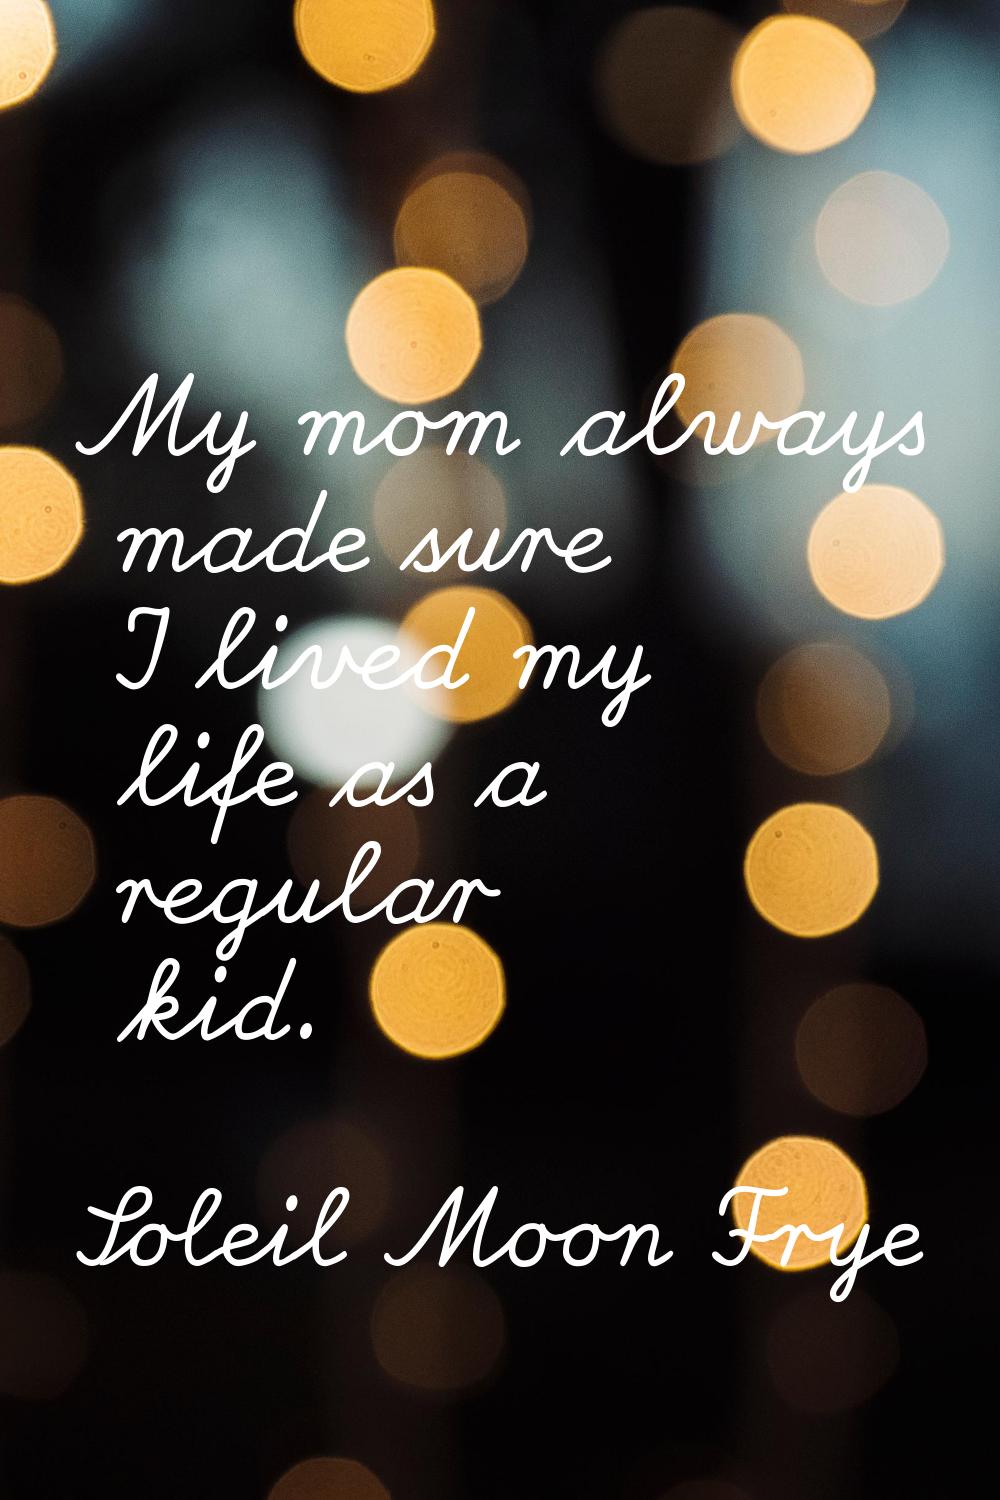 My mom always made sure I lived my life as a regular kid.